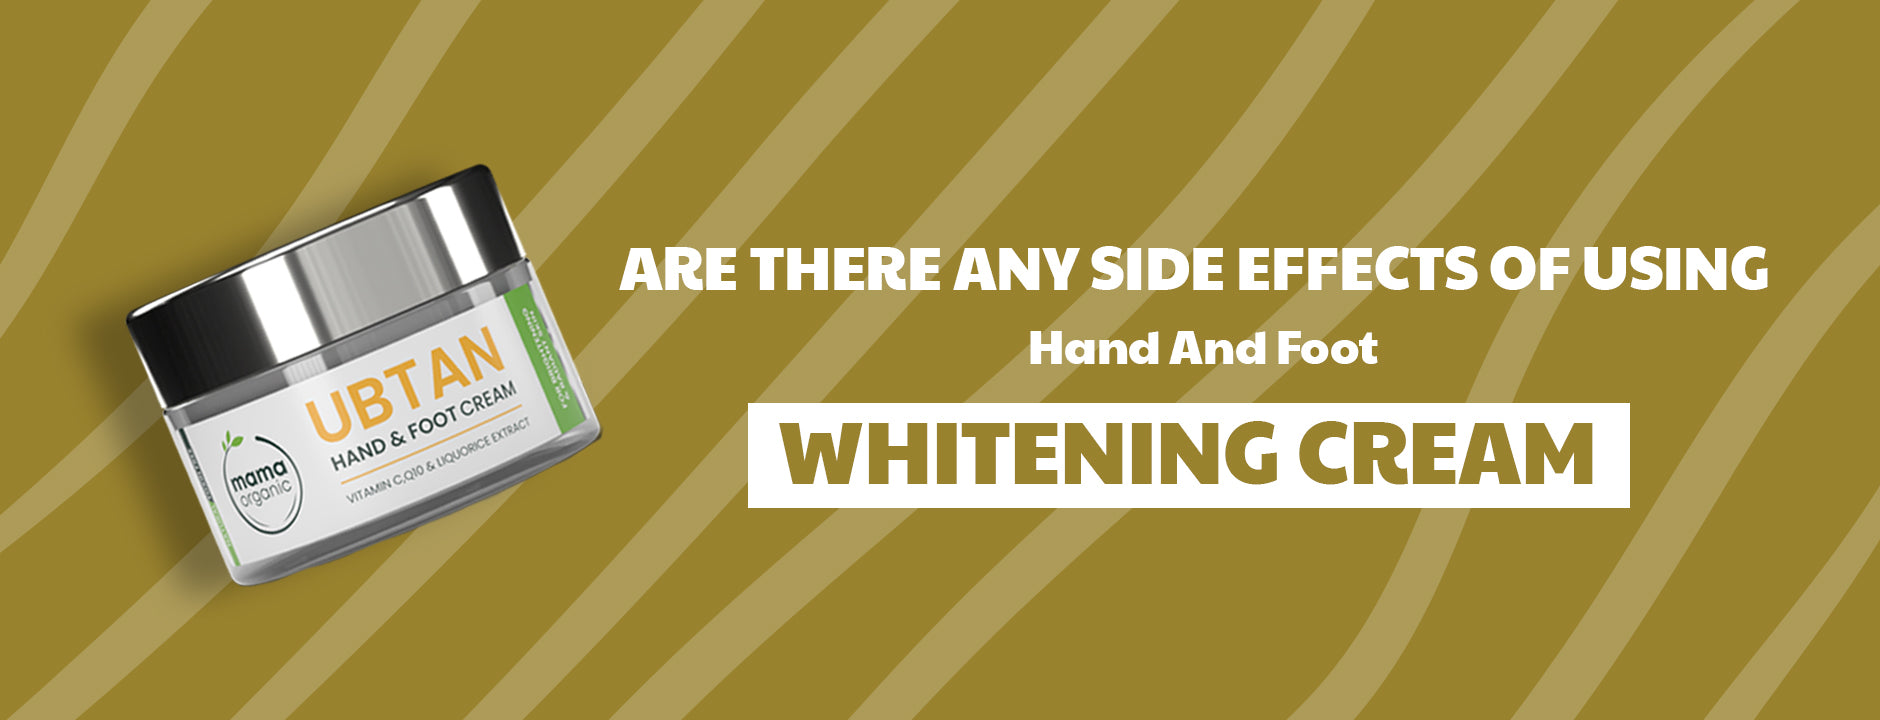 Are There Any Side Effects of Using Hand and Foot Whitening Cream?